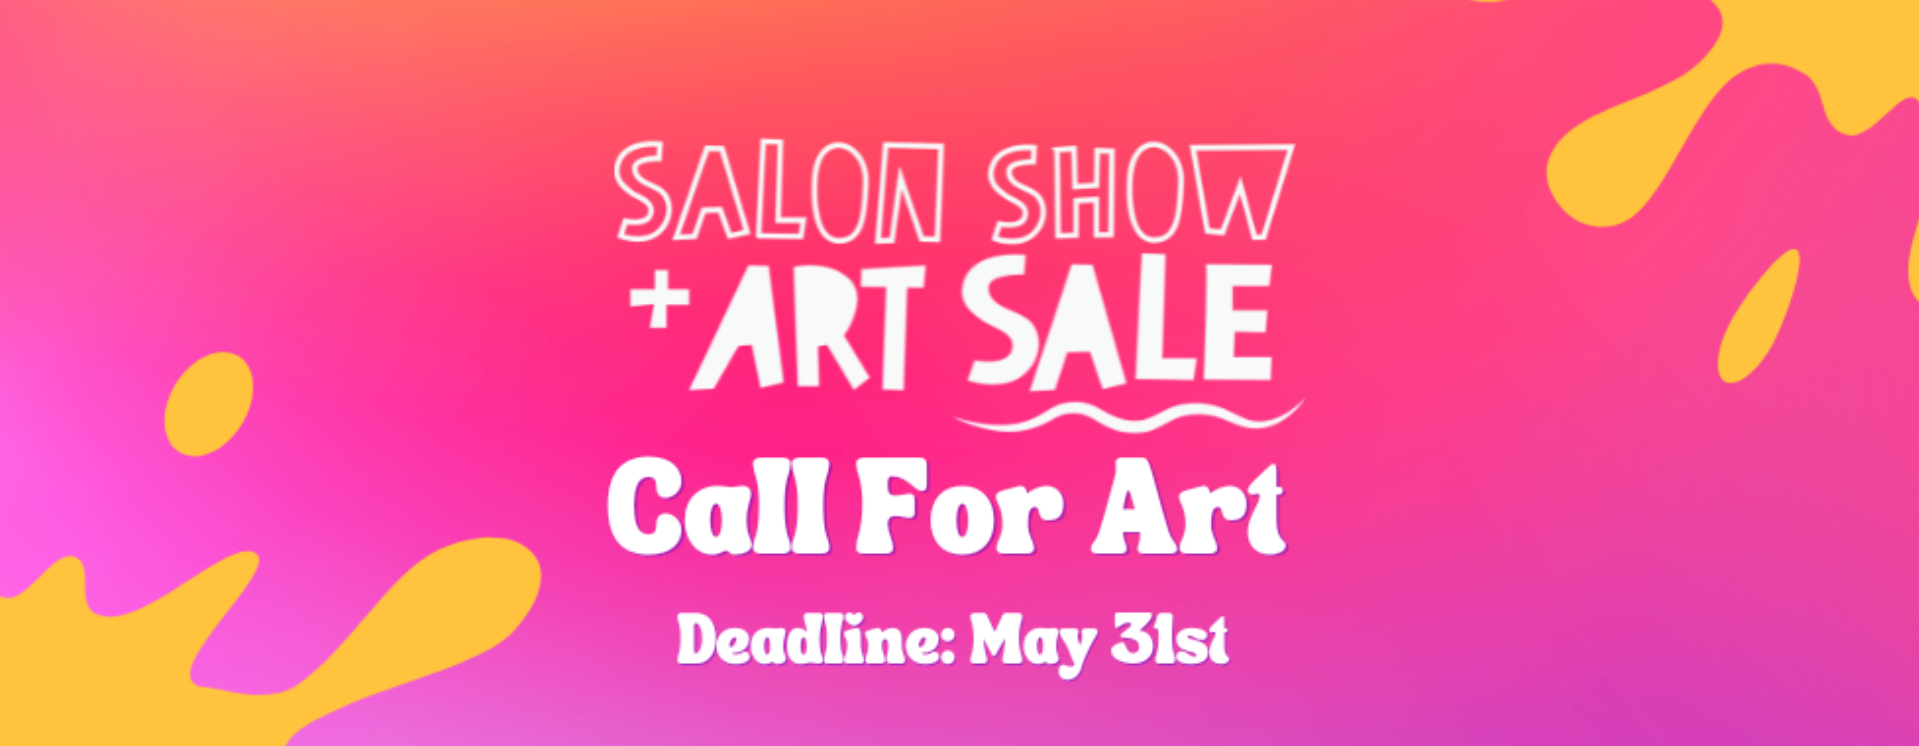 a poster for a salon show with the words art sale call for art.